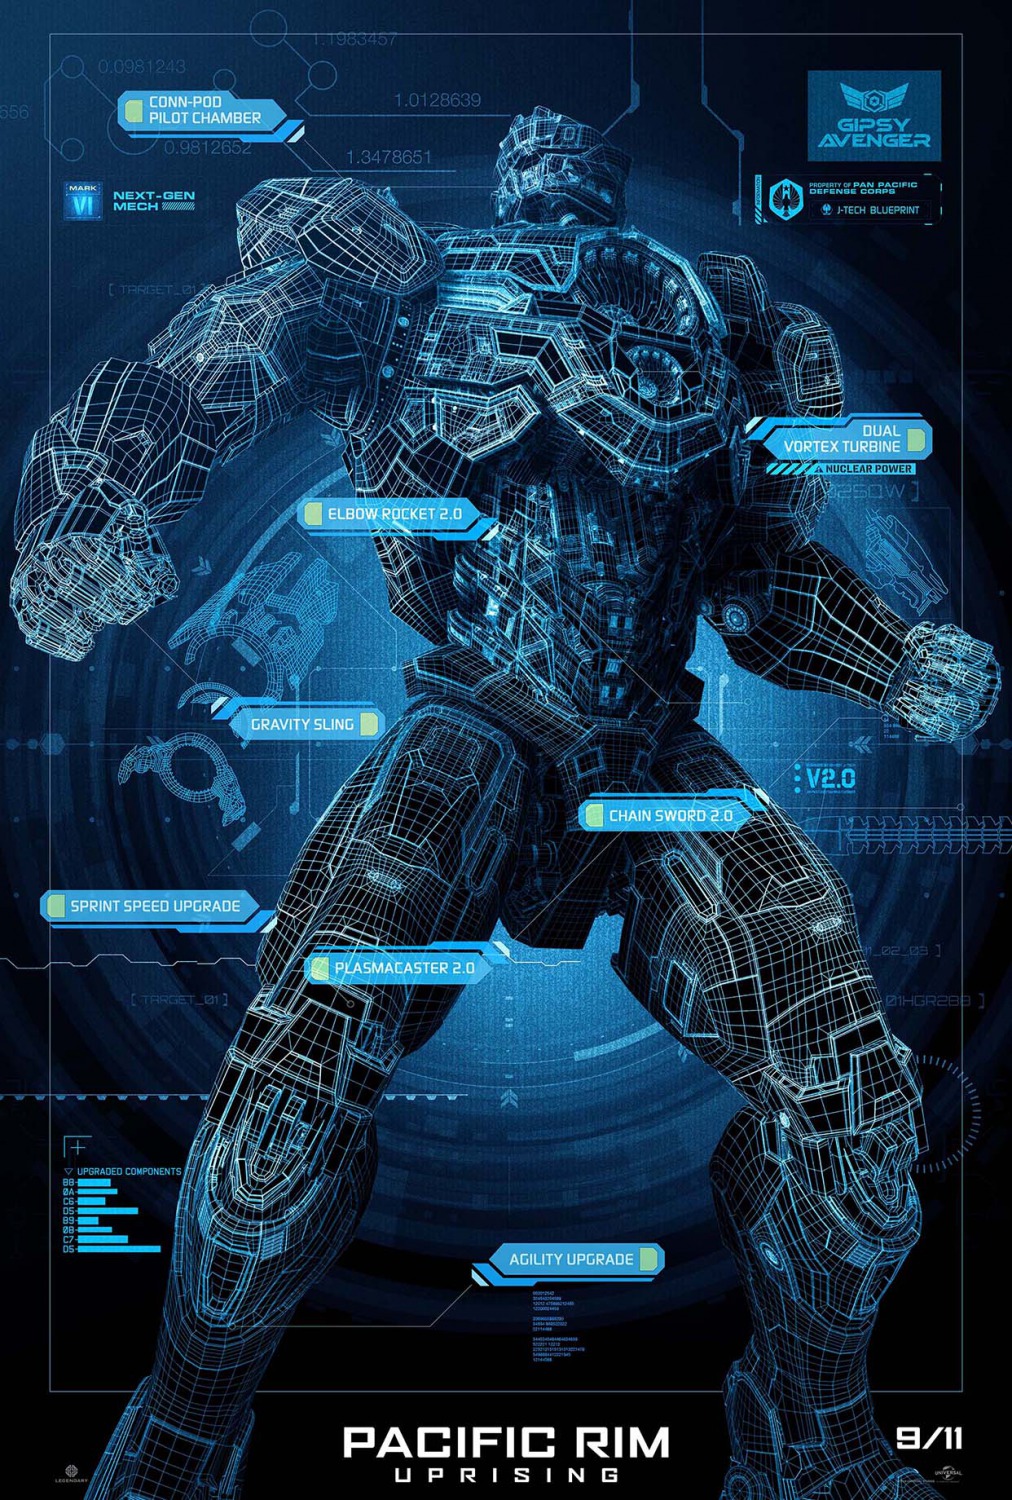 Extra Large Movie Poster Image for Pacific Rim Uprising (#46 of 49)